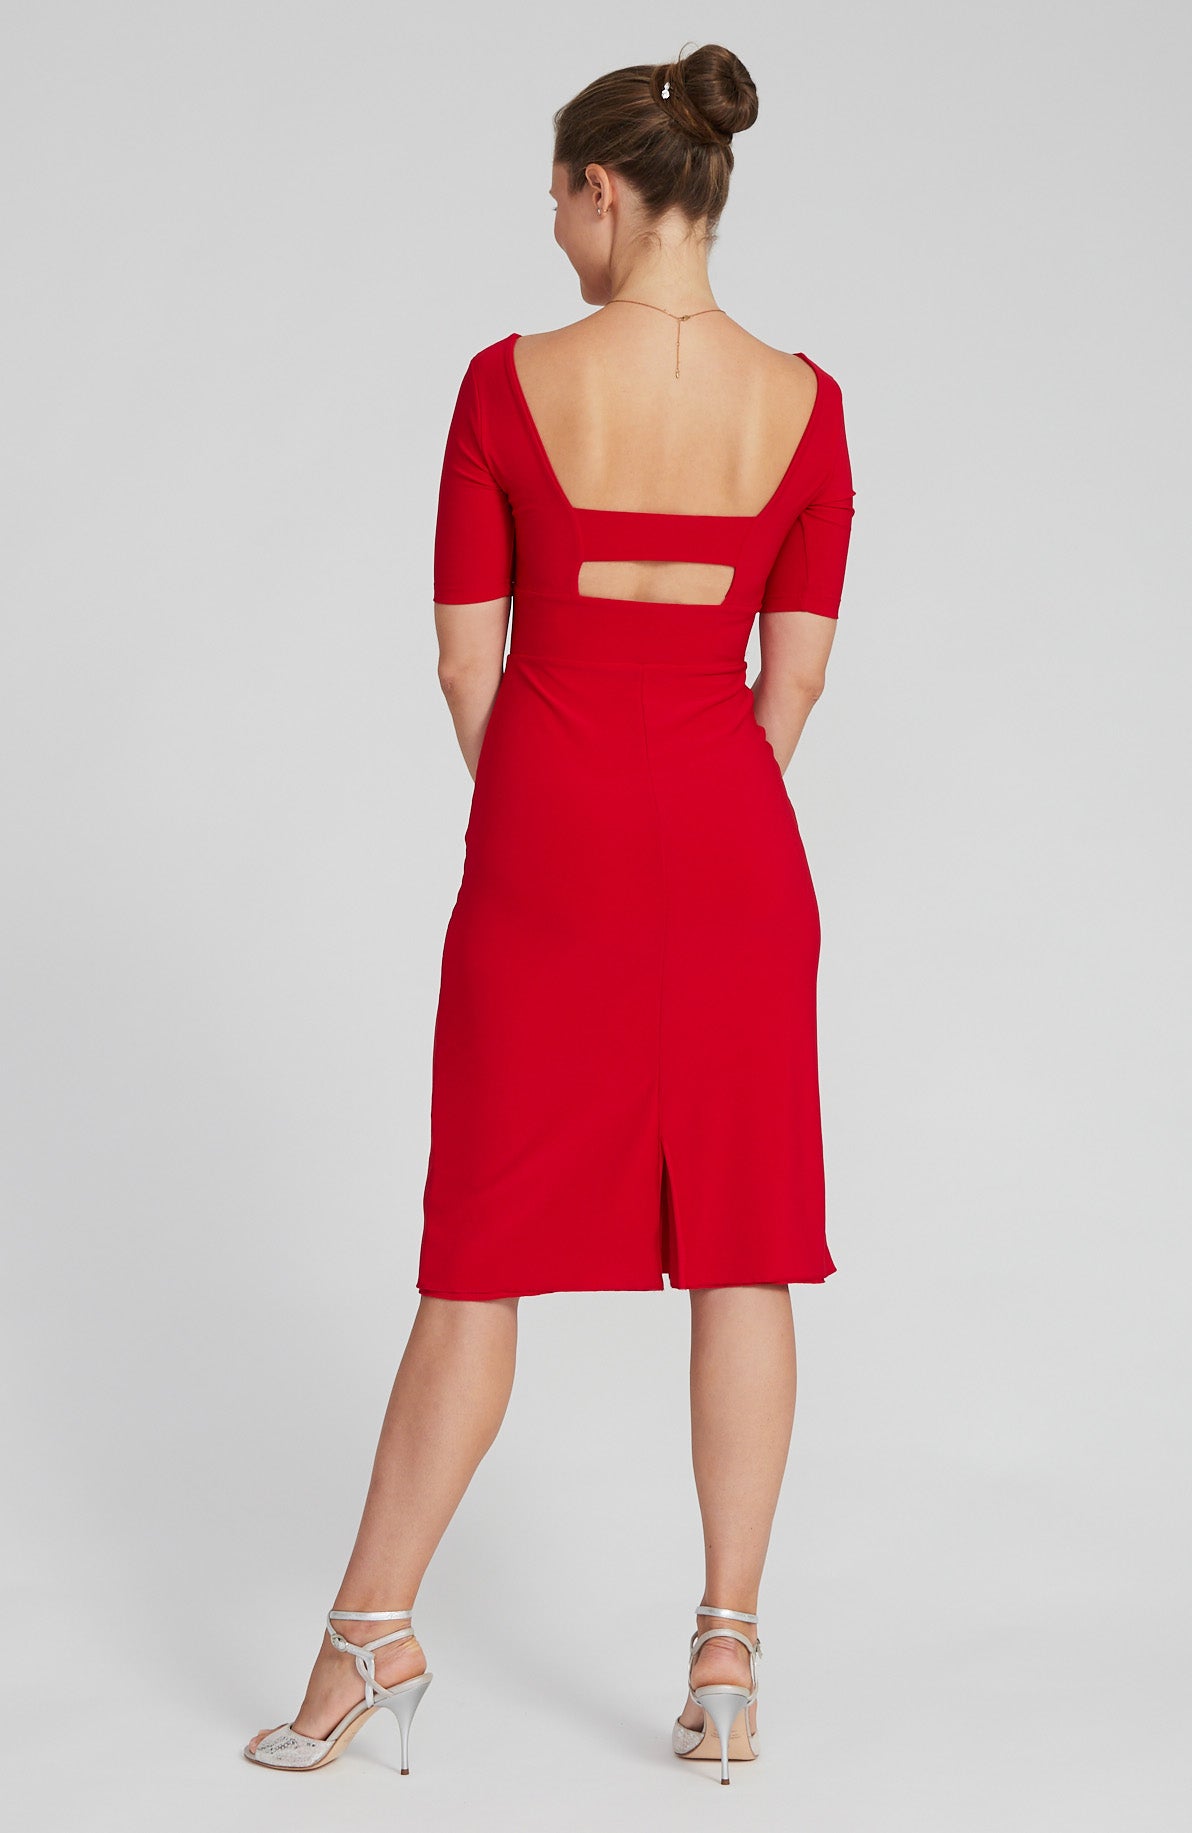 Red Tango Dress With a High Slit. One Shoulder Dance Dress. One Sleeve Dress  -  Israel